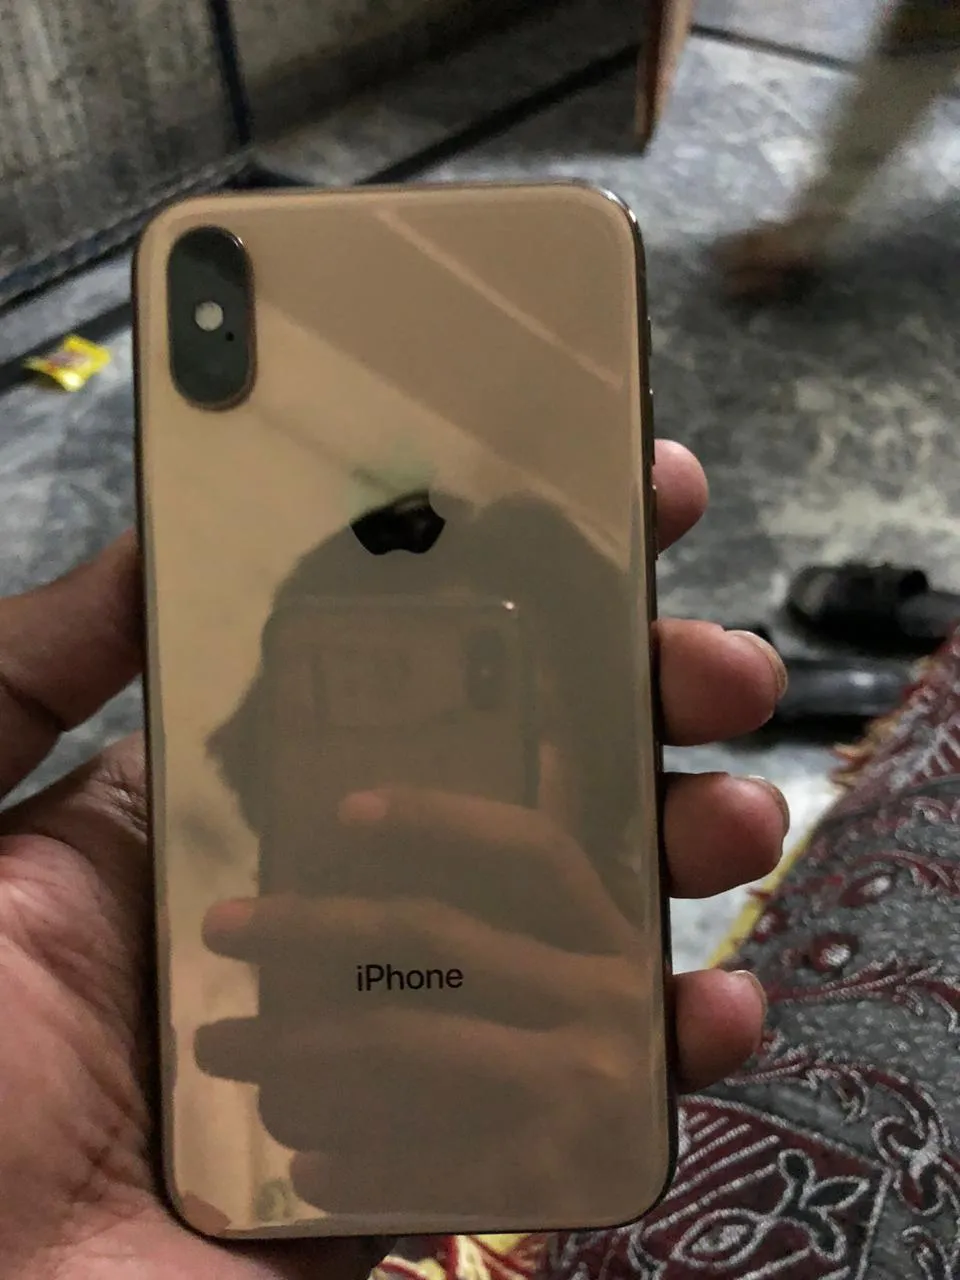 iPhone XS 64gb gold for sale at attractive price - photo 1